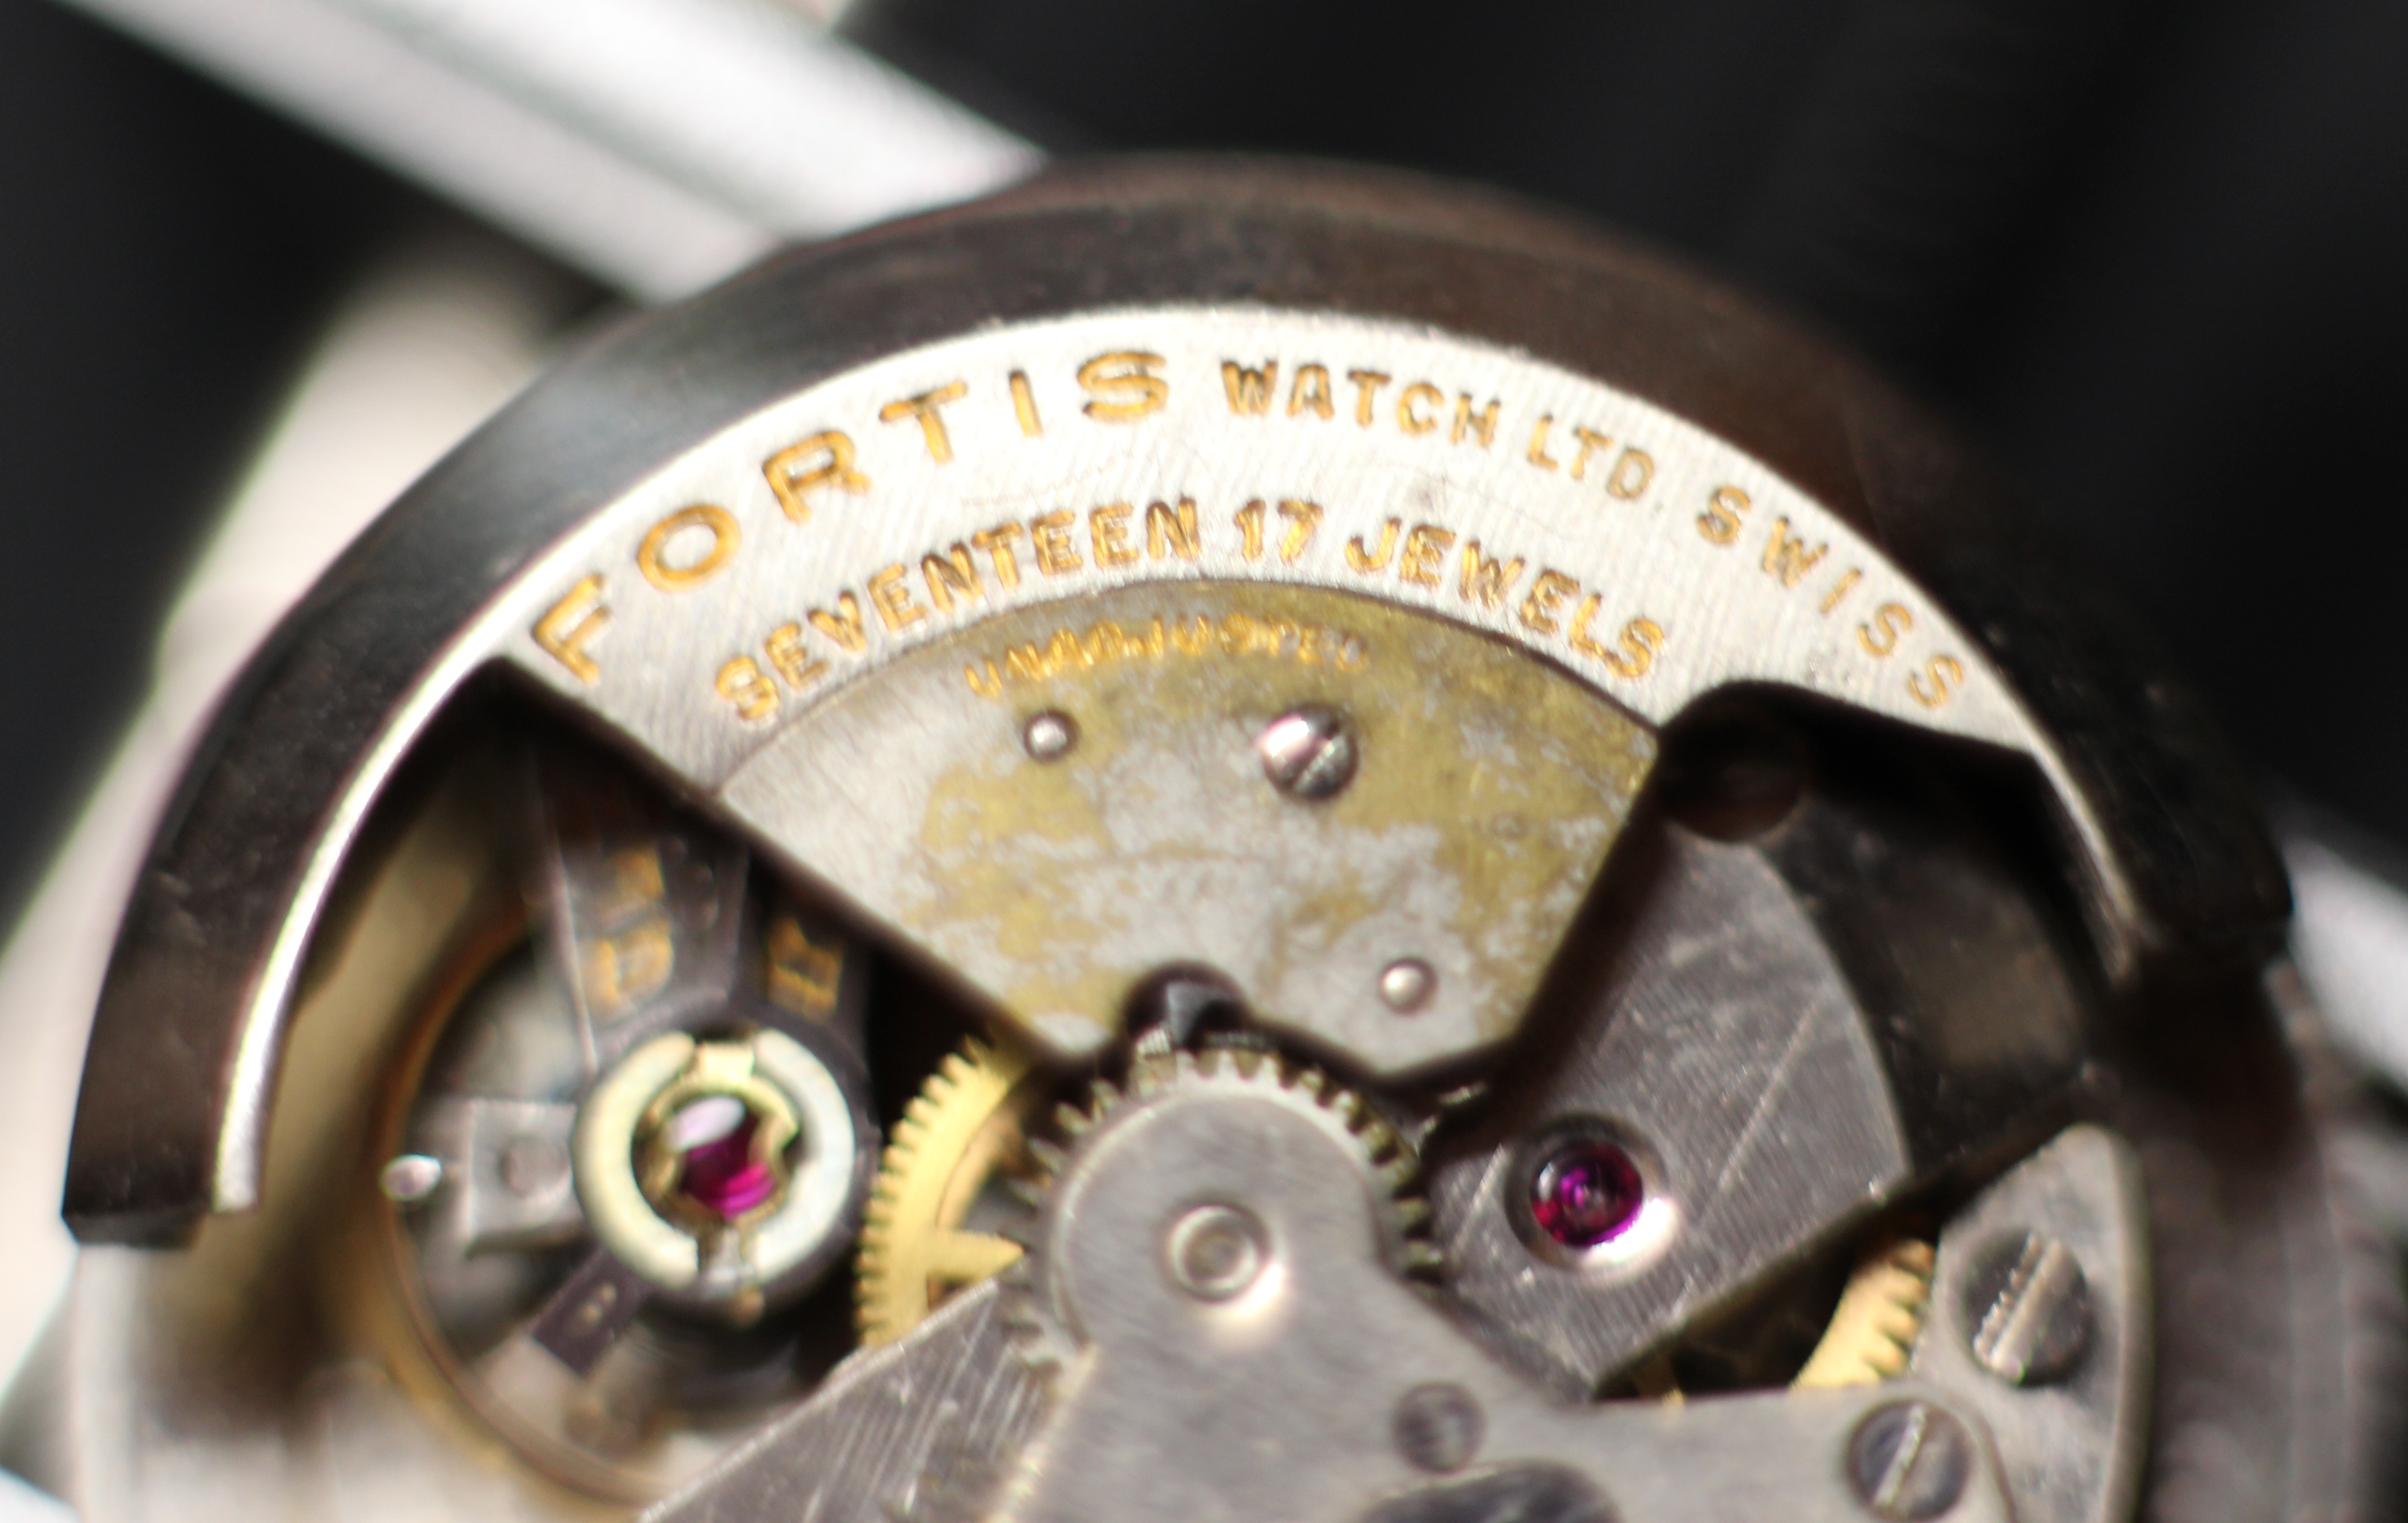 AS 1250 – Horology student